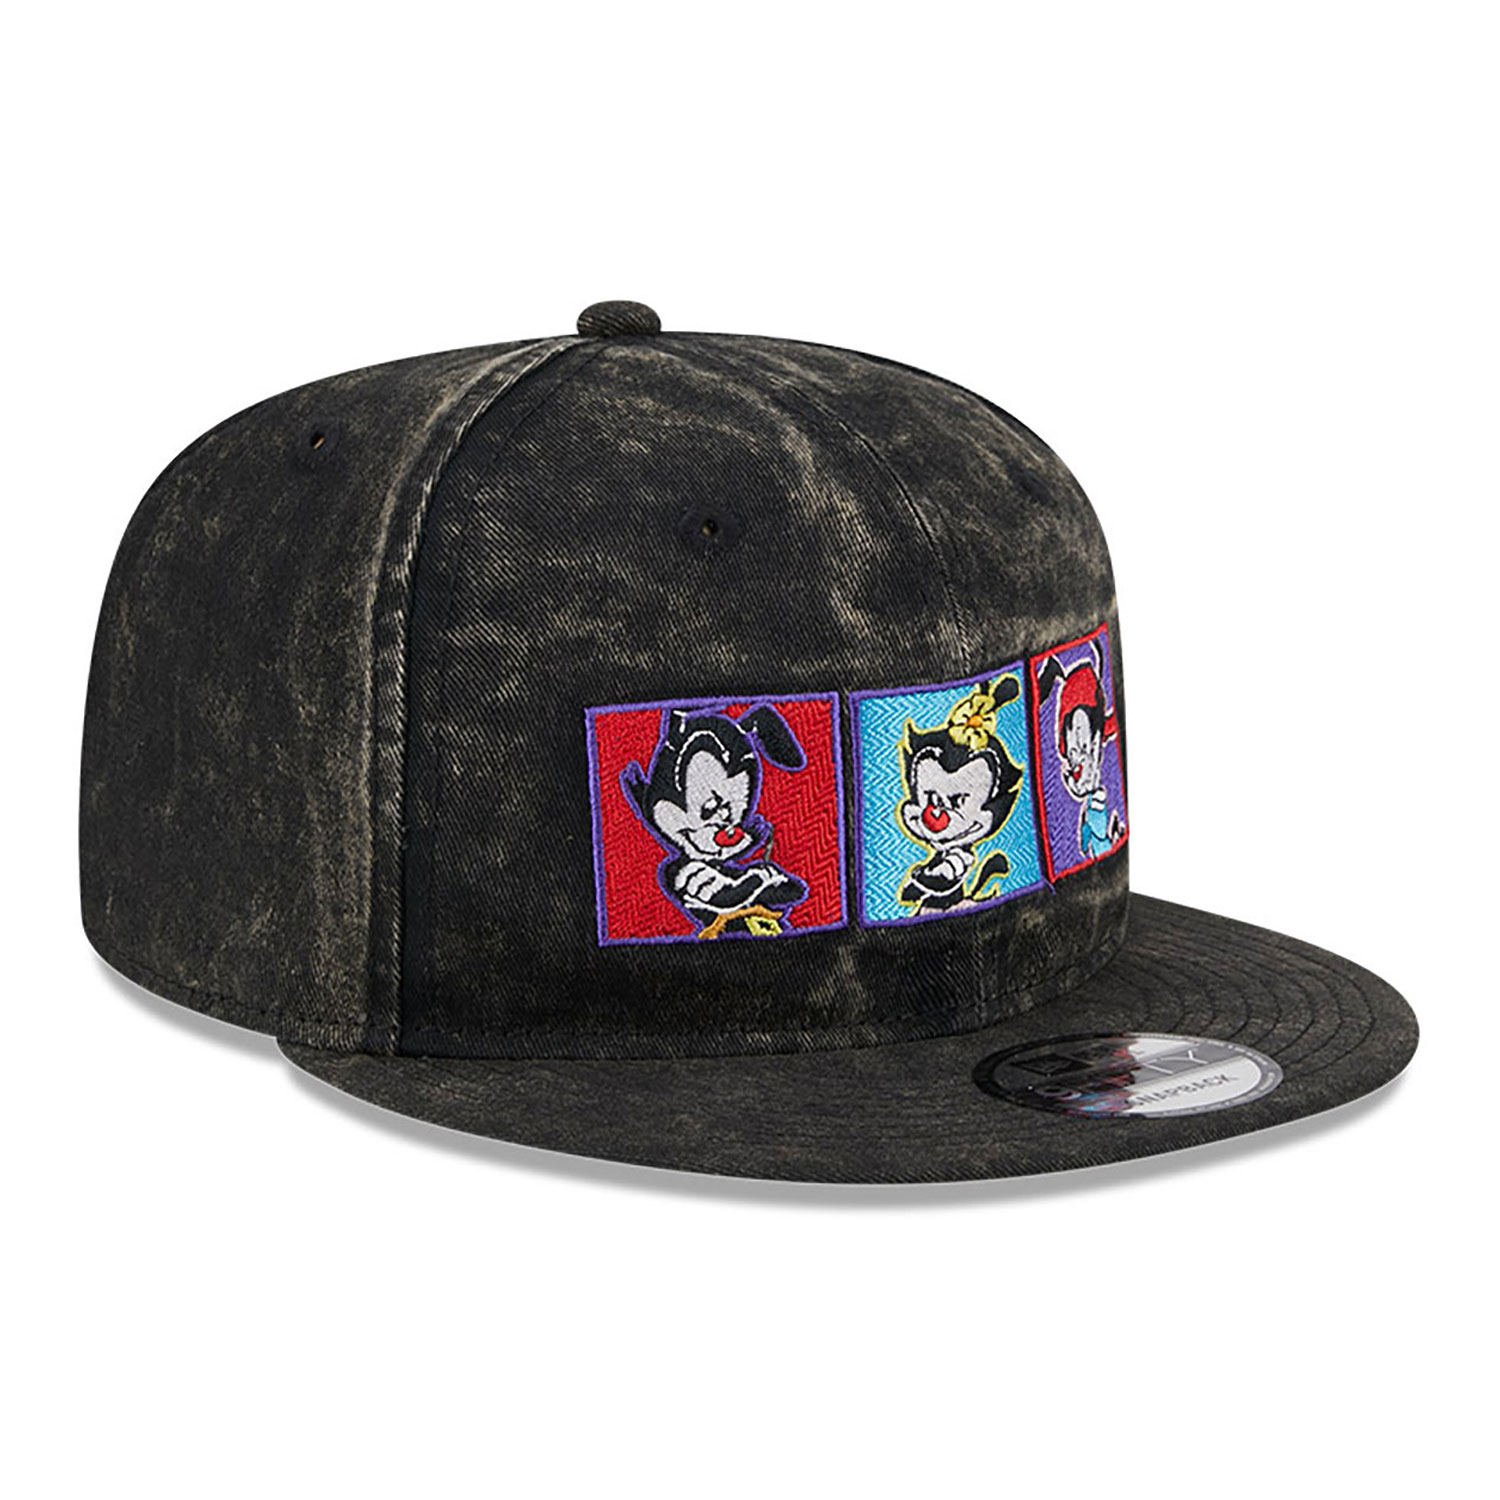 Warner Brothers Animaniacs Washed Black 9FIFTY Snapback Cap